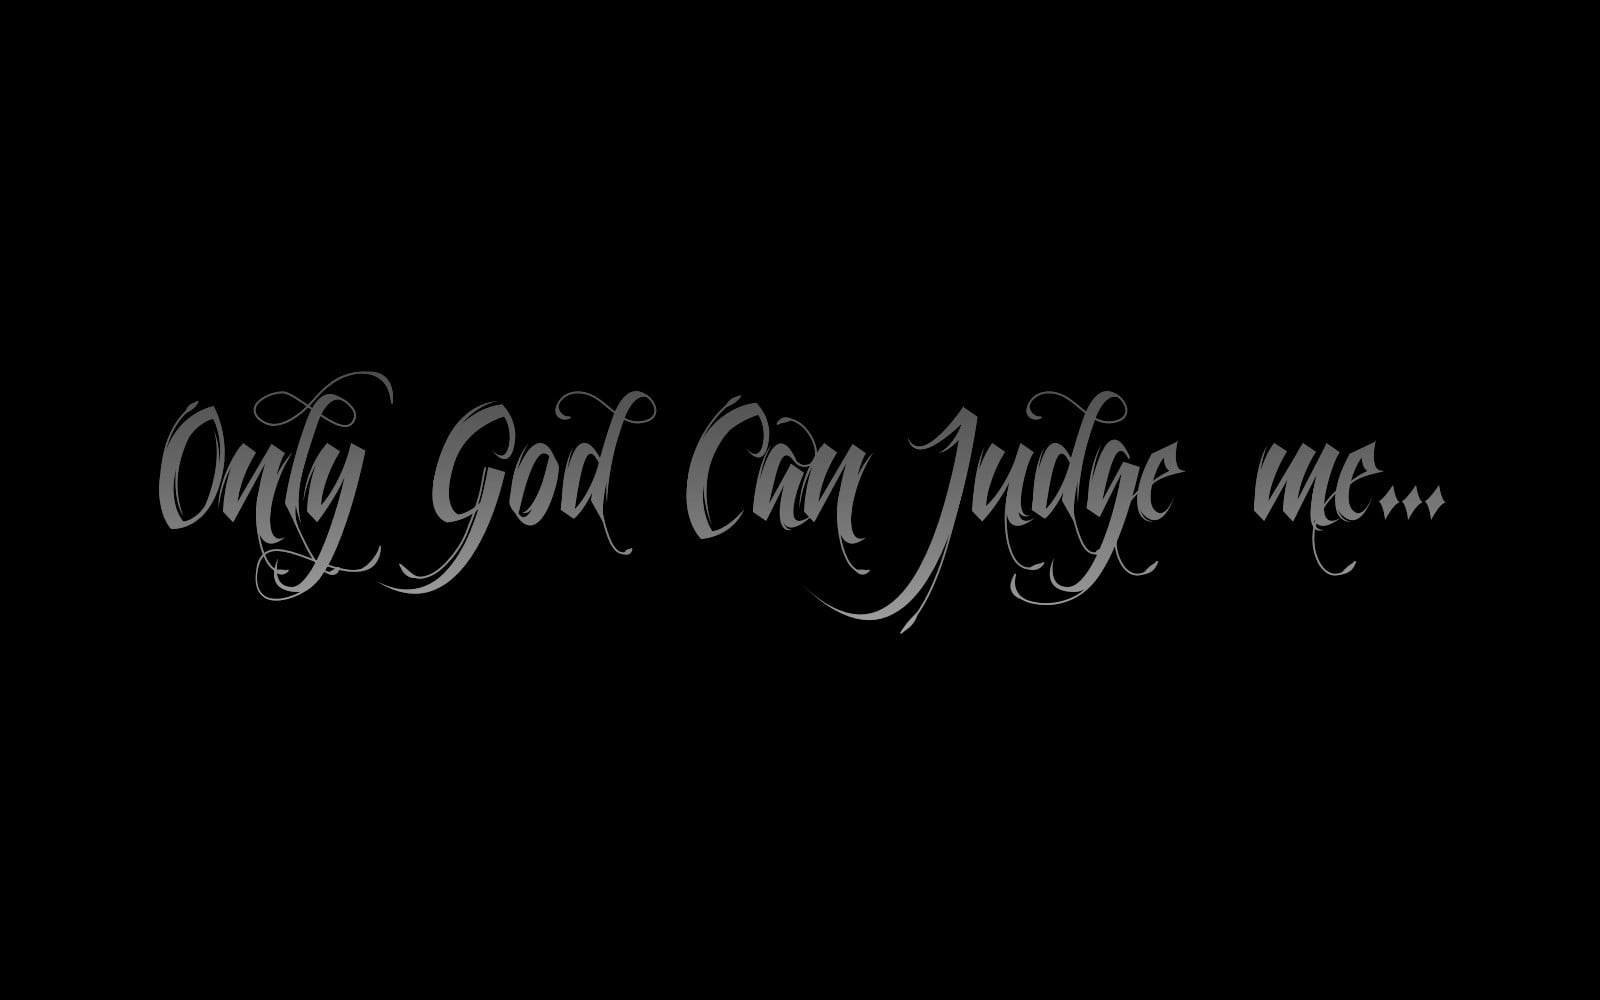  Only  God  Can  Judge Me  quote  HD wallpaper Wallpaper Flare